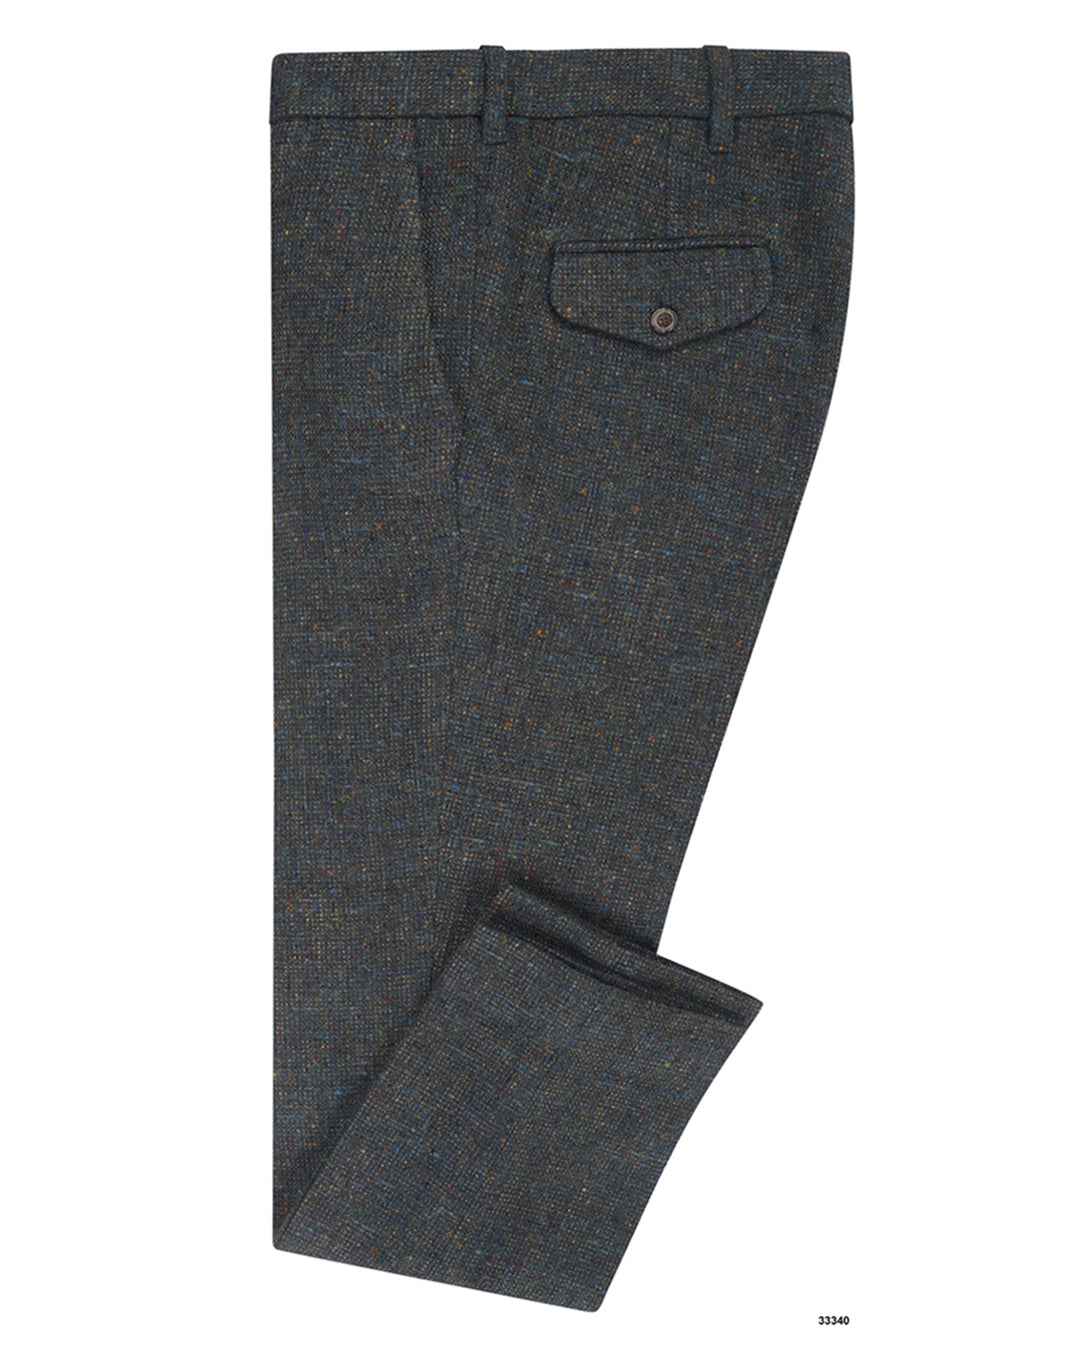 LUXIRE_MOLLOY Molloy Plain Donegal Tweed Pants - Pine Green